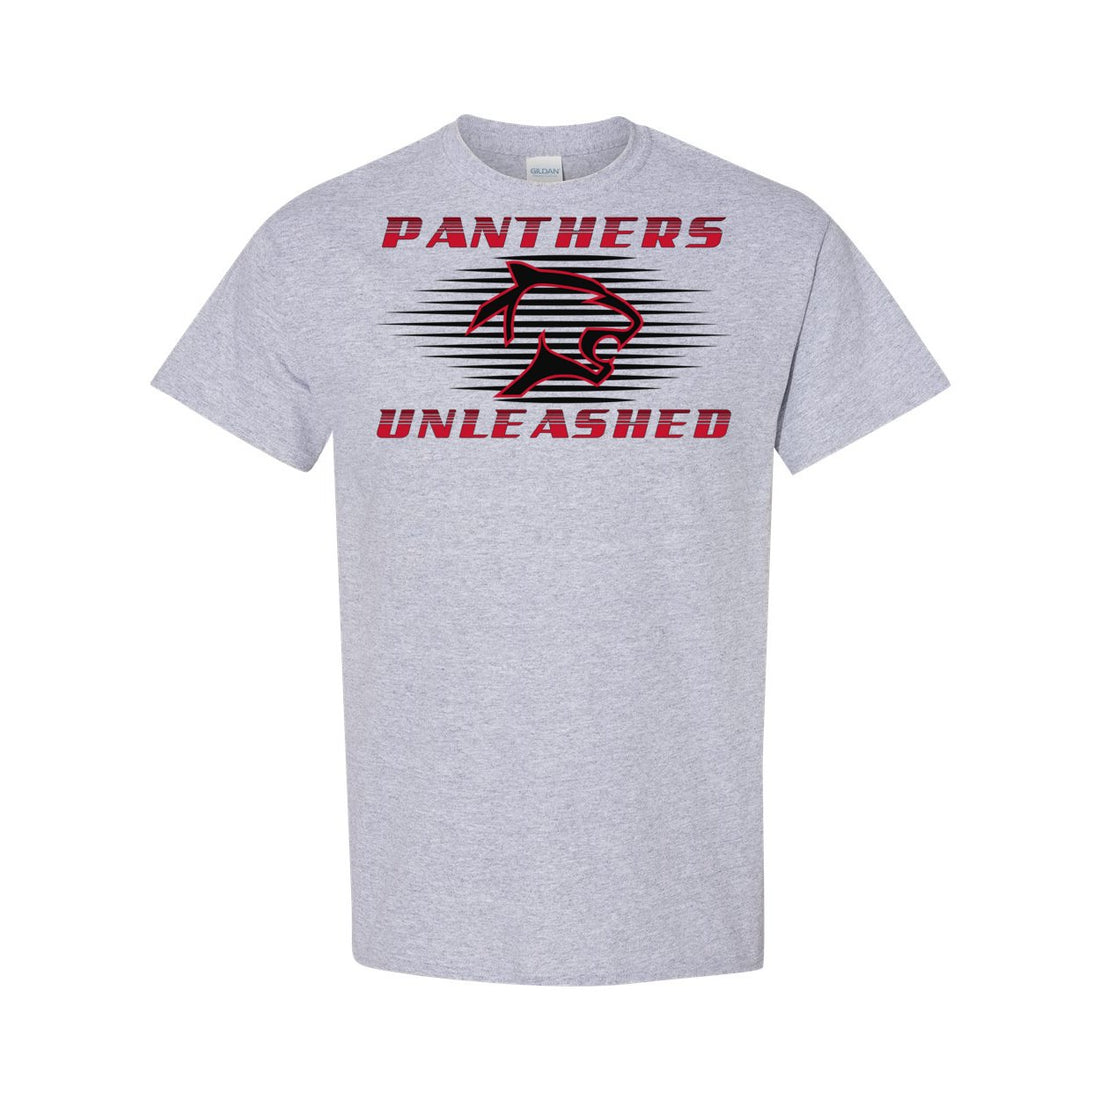 Panthers Unleashed 2.0 T-Shirt - T-Shirts - Positively Sassy - Panthers Unleashed 2.0 T-Shirt